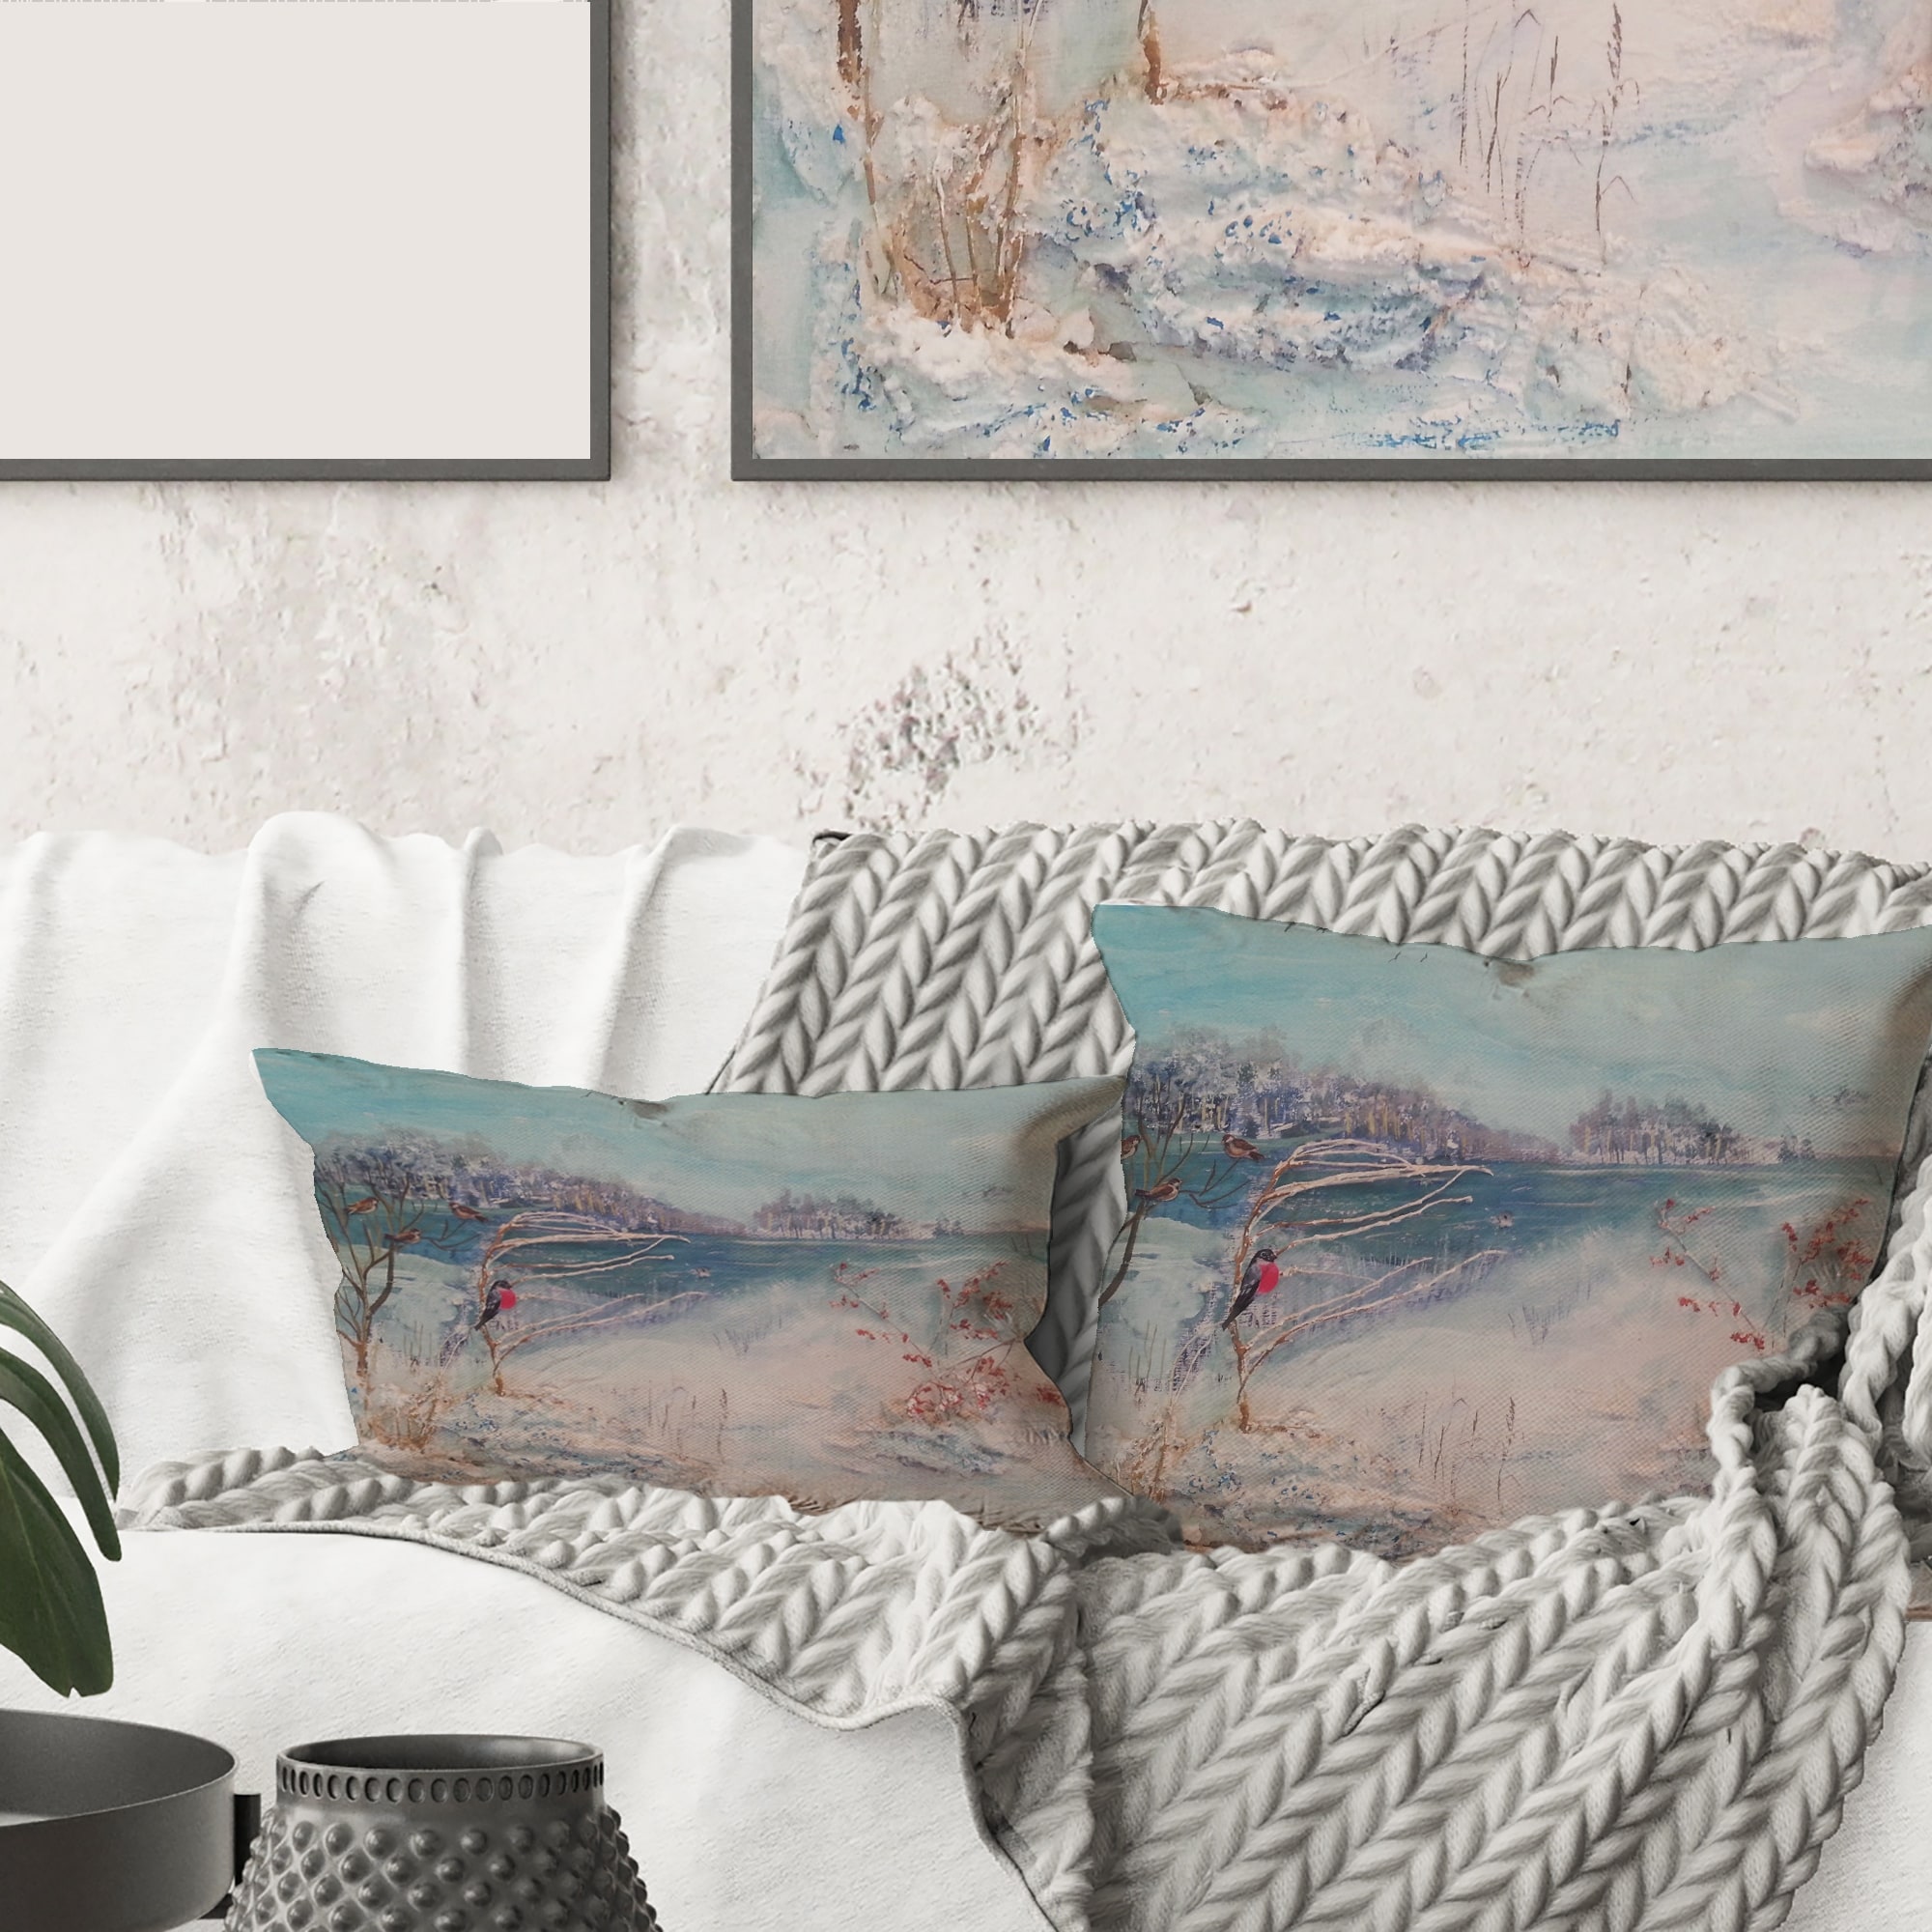 https://ak1.ostkcdn.com/images/products/is/images/direct/1872d6fdfc88938782f0129de02747fae1d2787c/Designart-%27Winter-Trees-River-and-Birds%27-Lake-House-Printed-Throw-Pillow.jpg